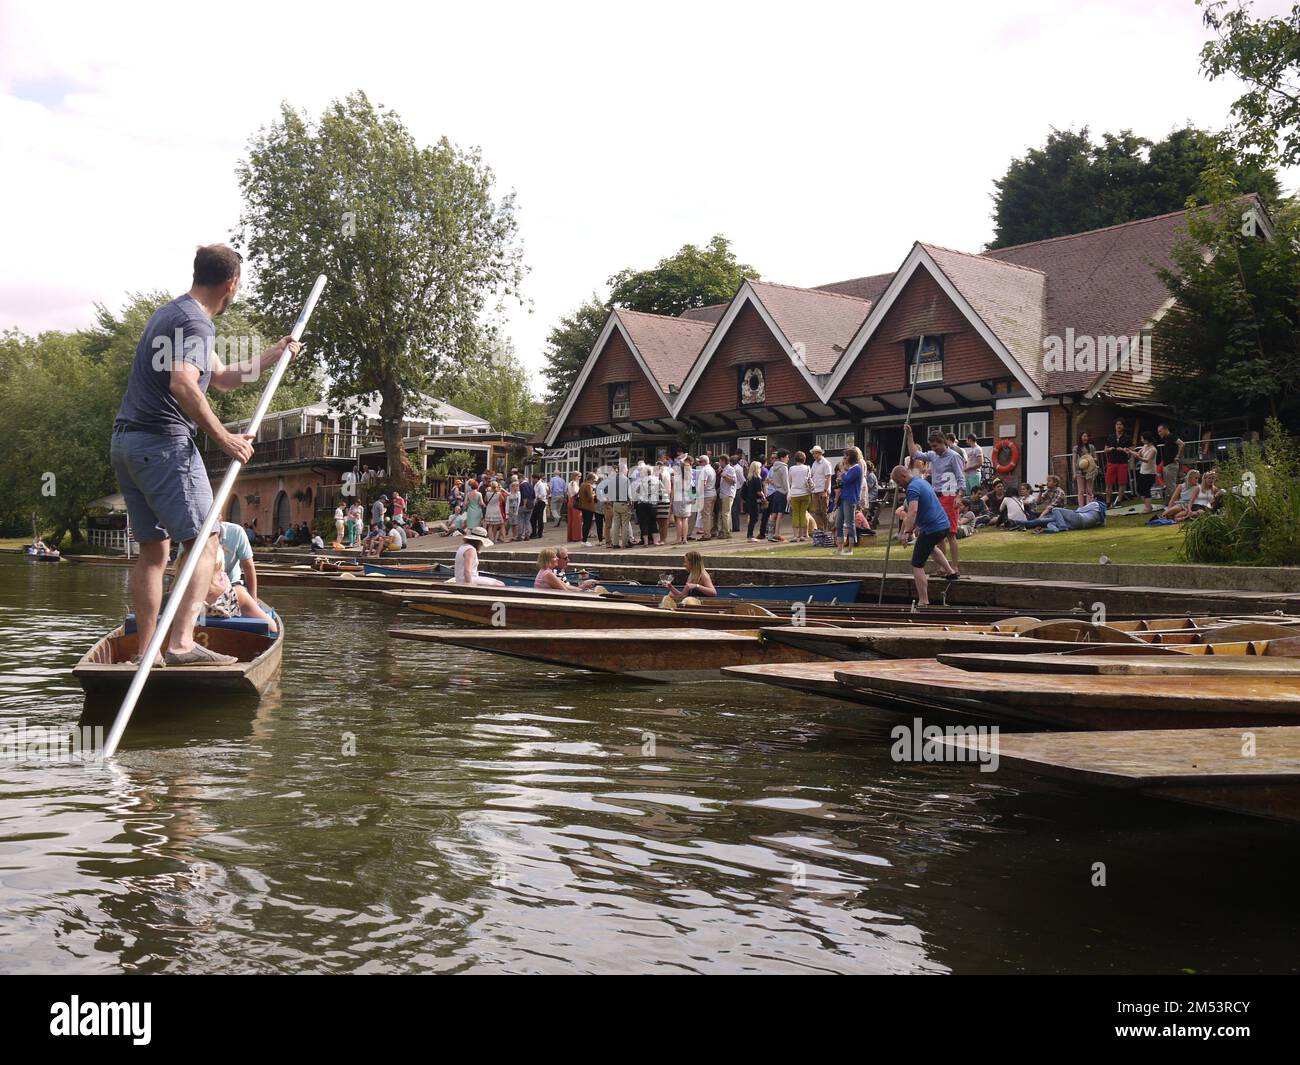 Cherwell Boathouse, Oxford, UK, on a busy July afternoon in 2015 Stock Photo